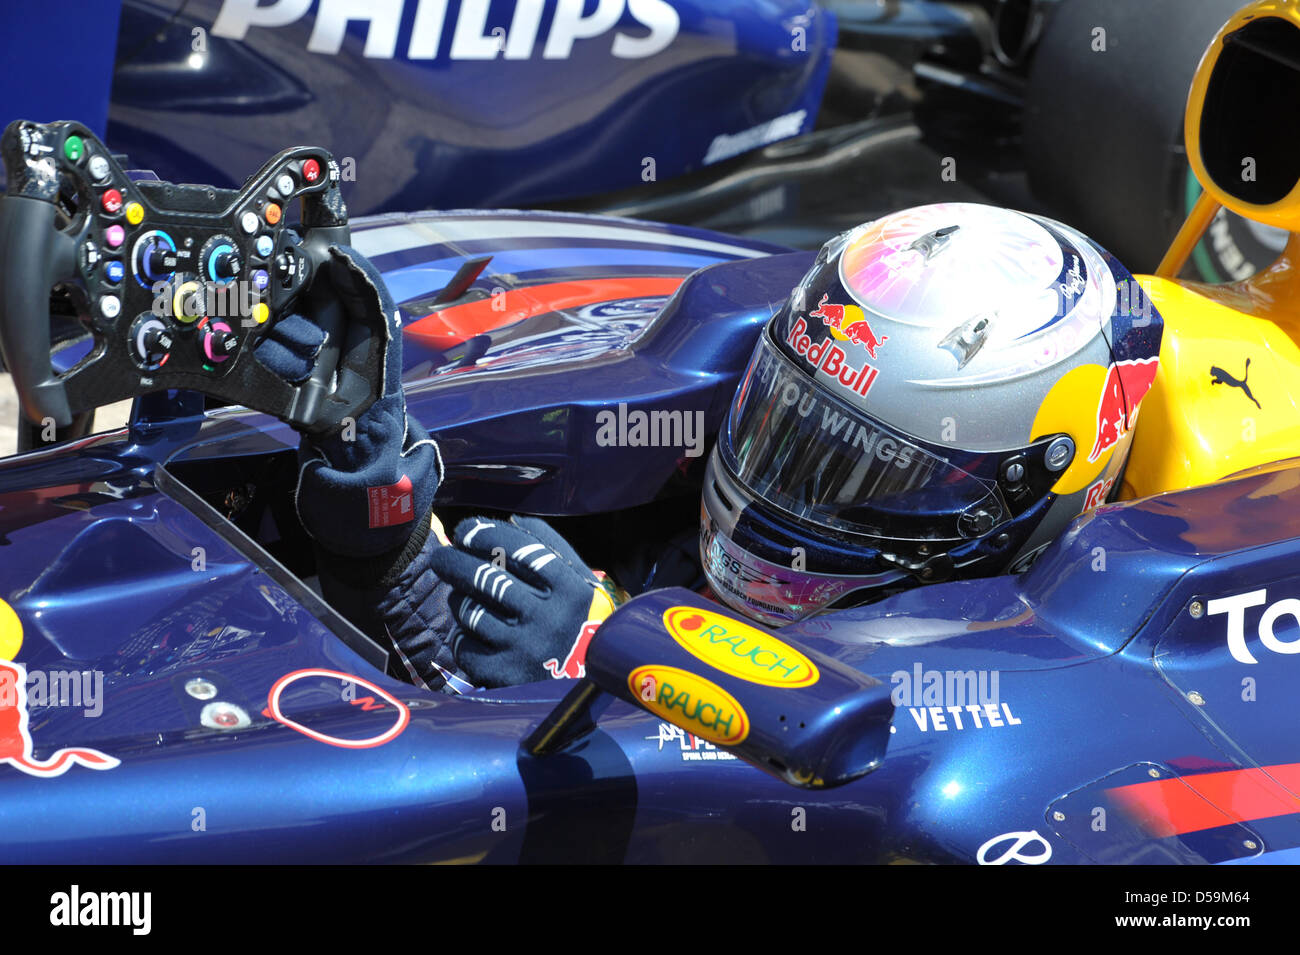 German driver Sebastian Vettel of Red Bull Racing celebrates his pole position after Qualifying at the street circuit of Valencia, Spain, 26 June 2010. The 2010 Formula 1 Grand Prix of Europe was held on 27 June. Photo: David Ebener Stock Photo